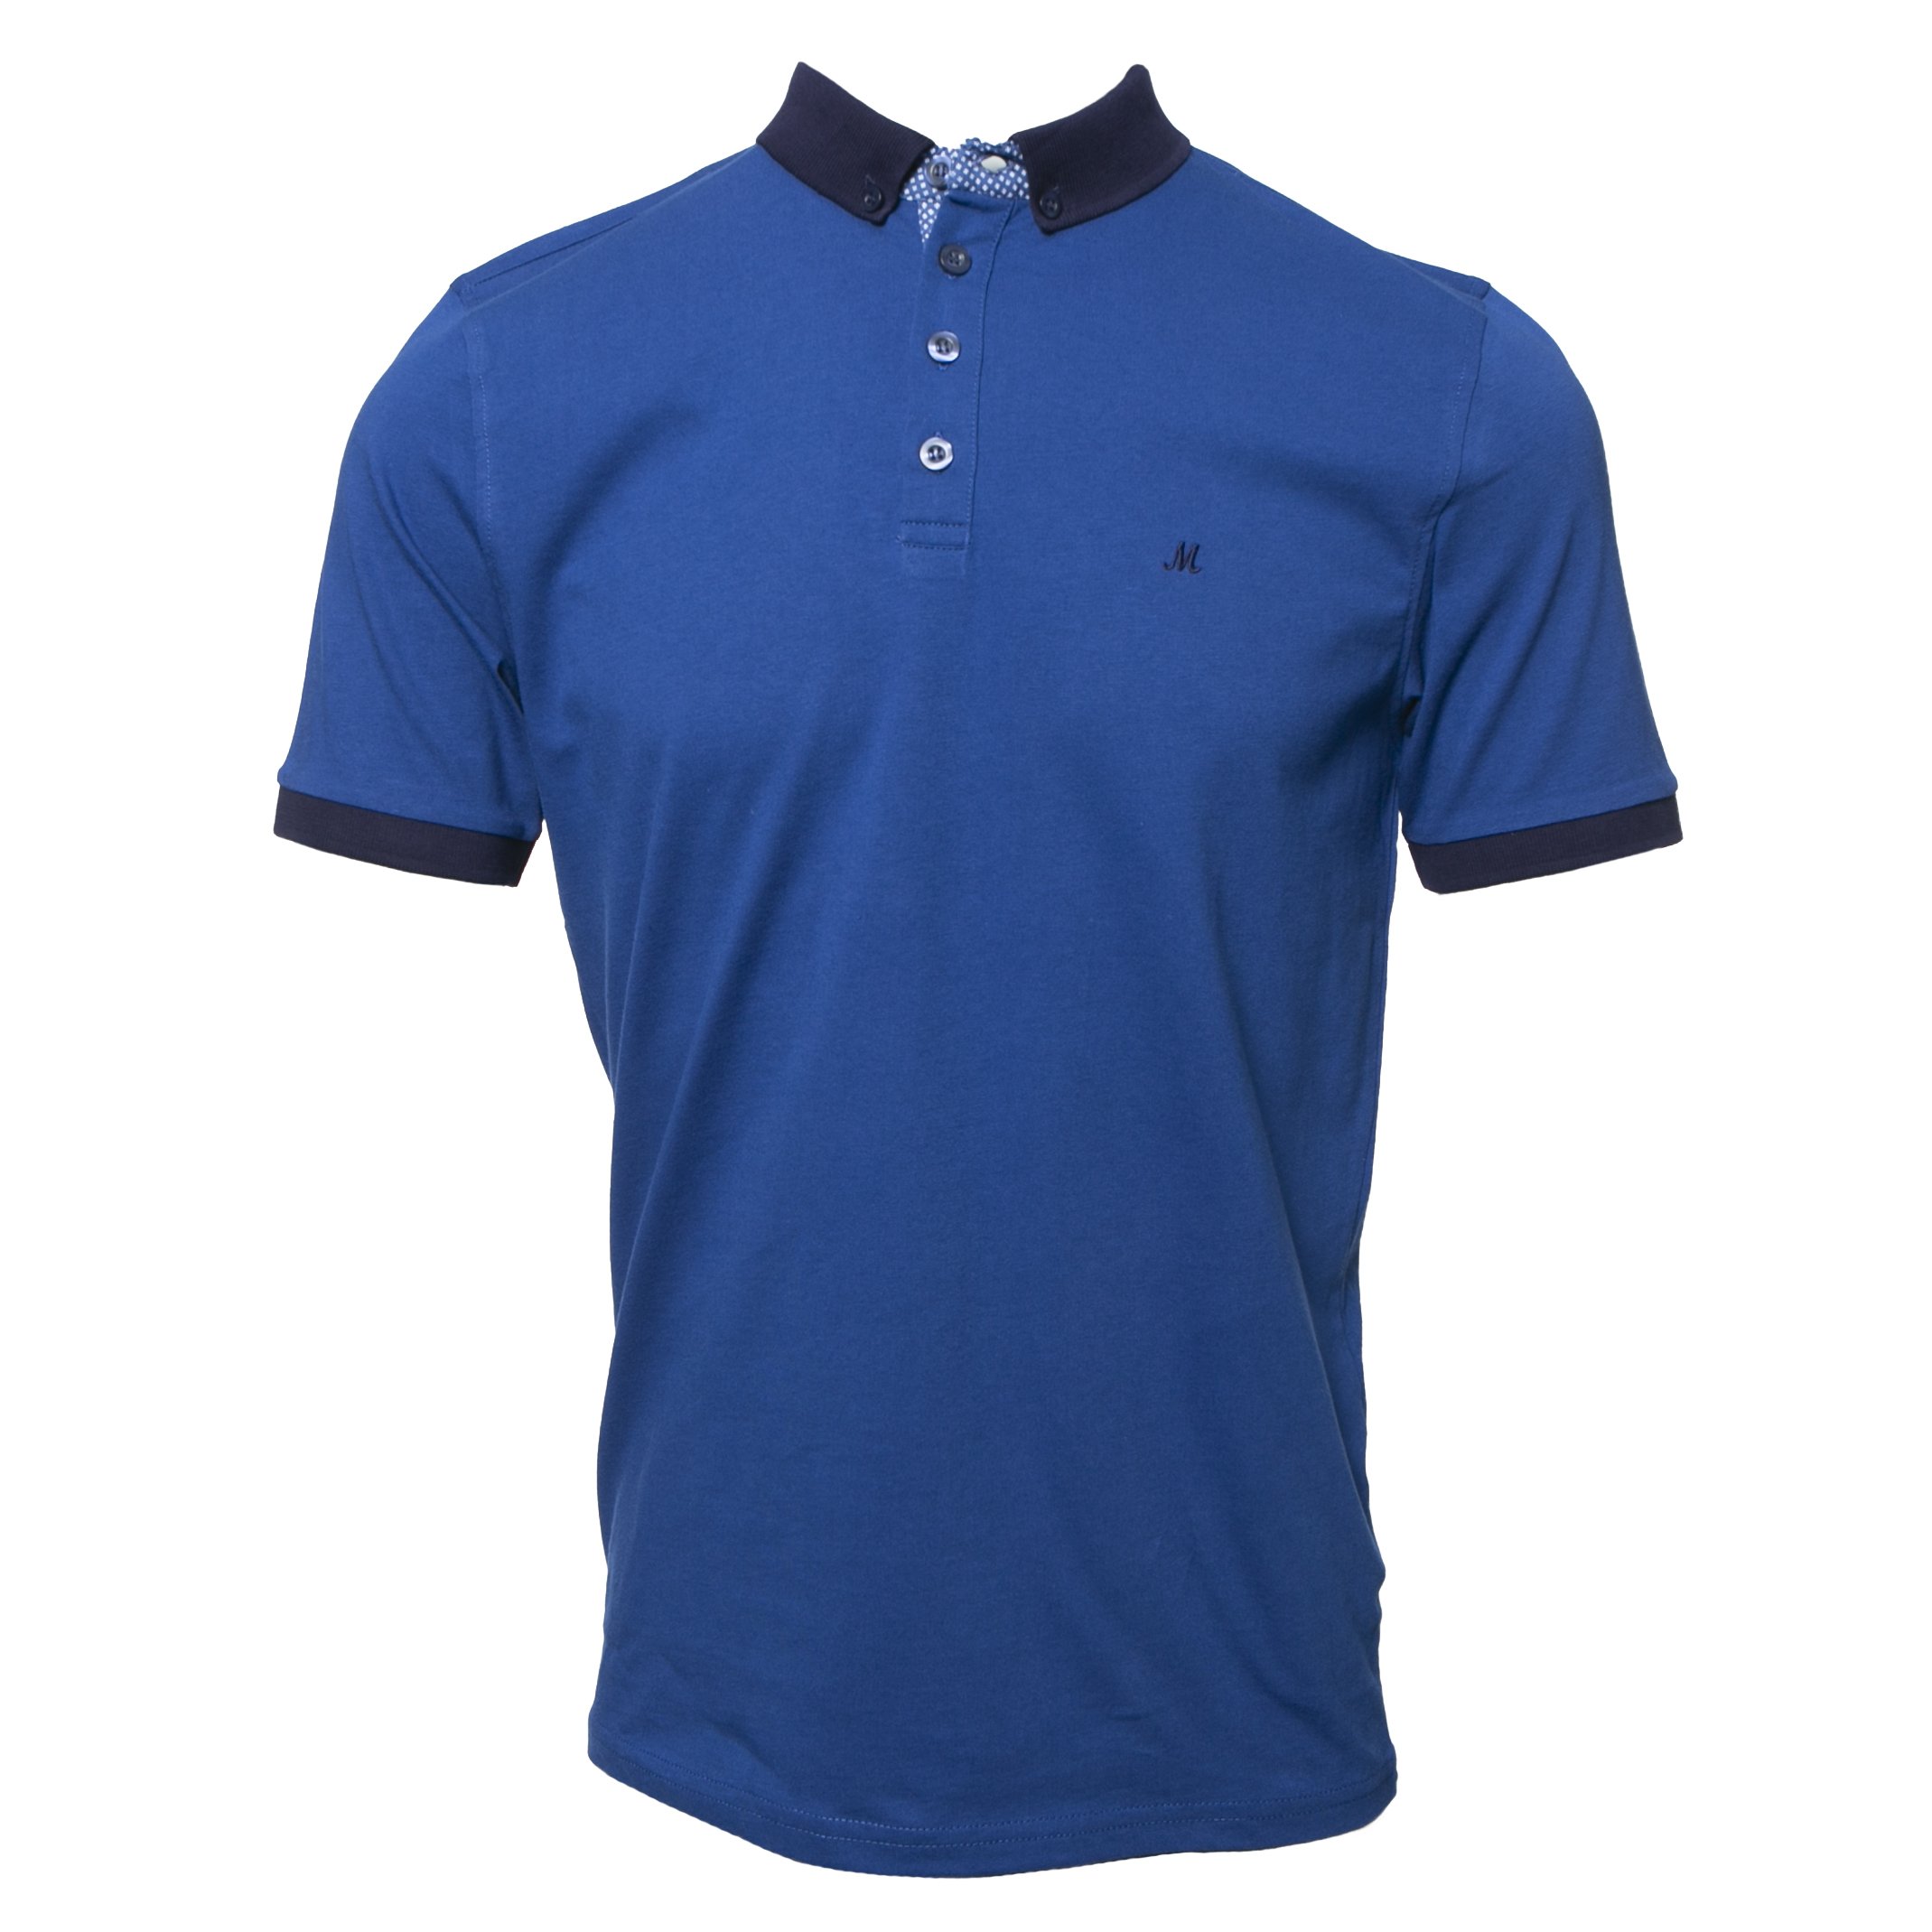 PRINCESS 3 EGYPTIAN BLUE POLO TEE | Gasoline.ie Irish owned online ...